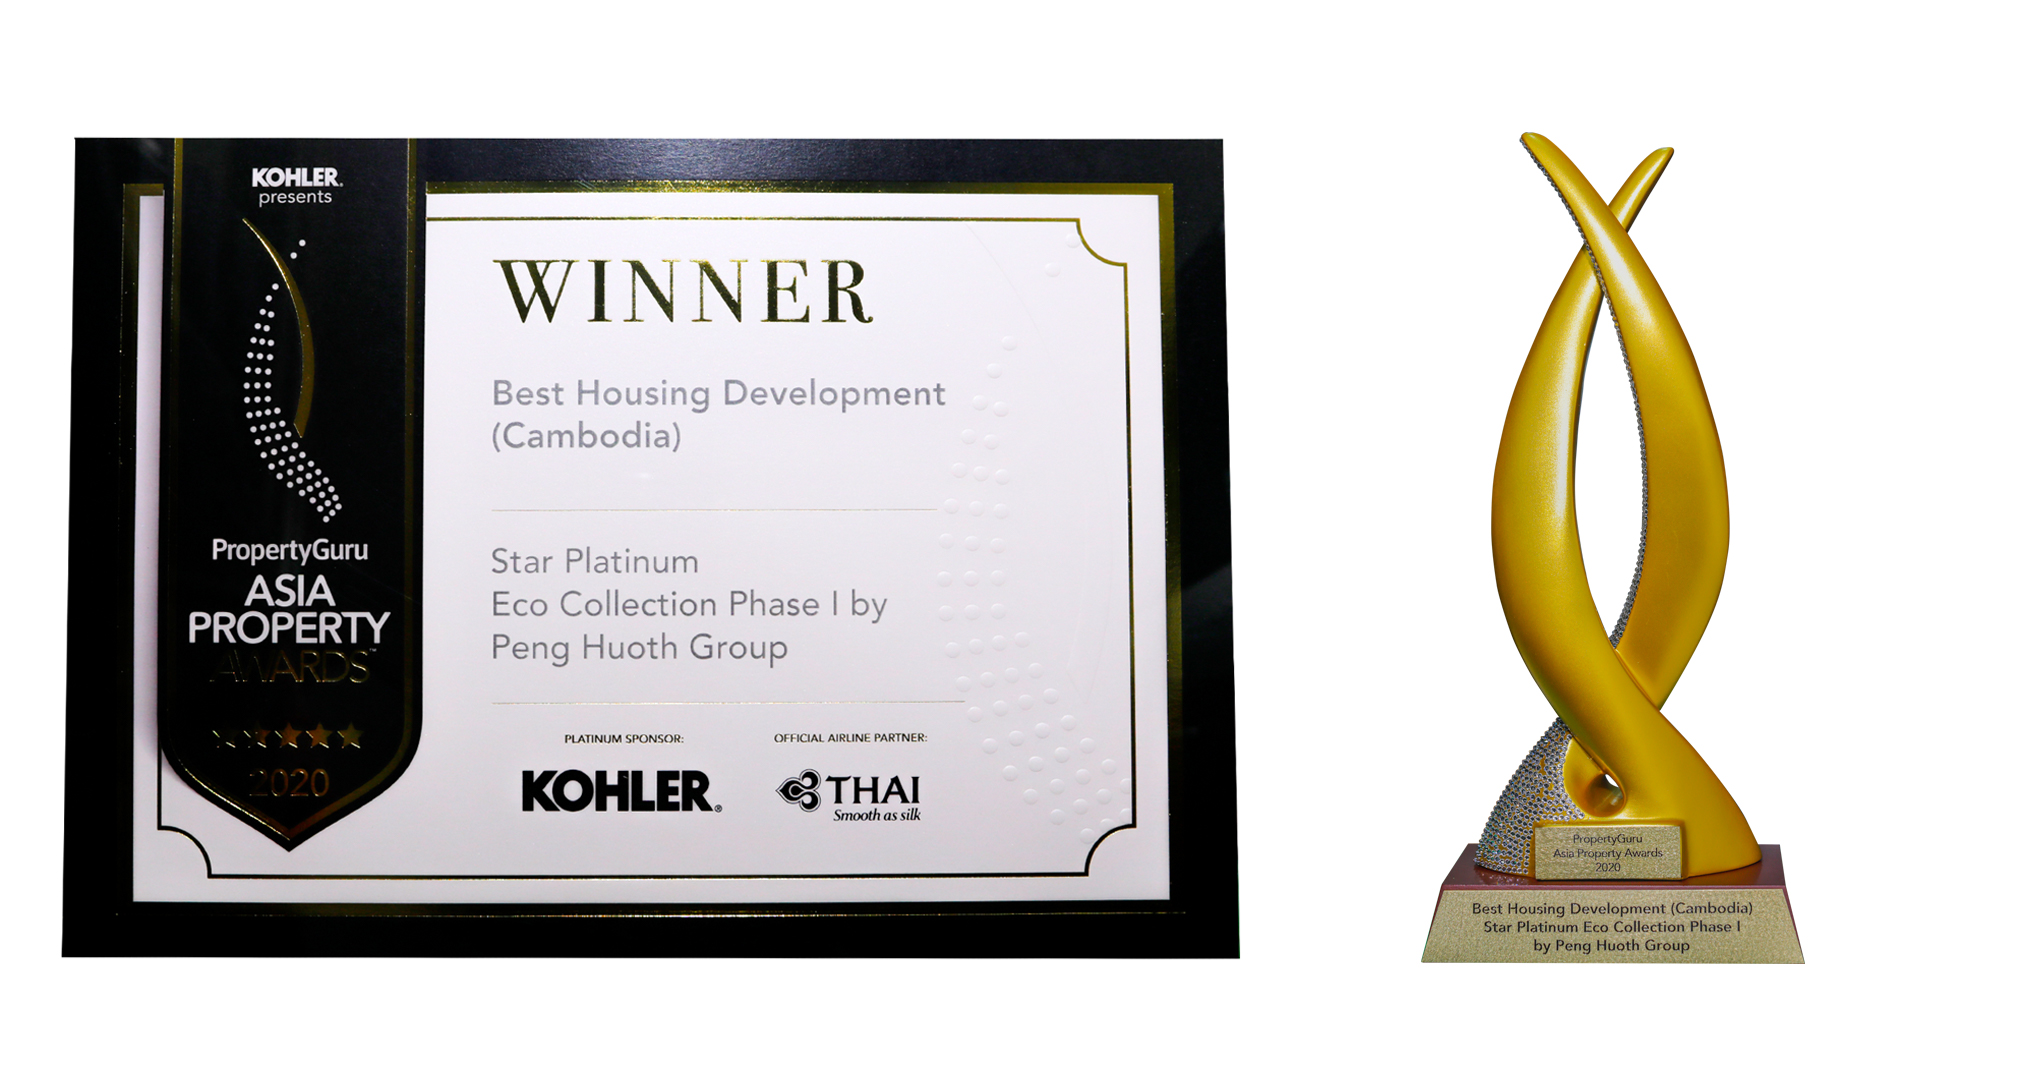 Best Housing Development (Cambodia) The Star Platinum Eco Collection Phase I by Peng Huoth Group